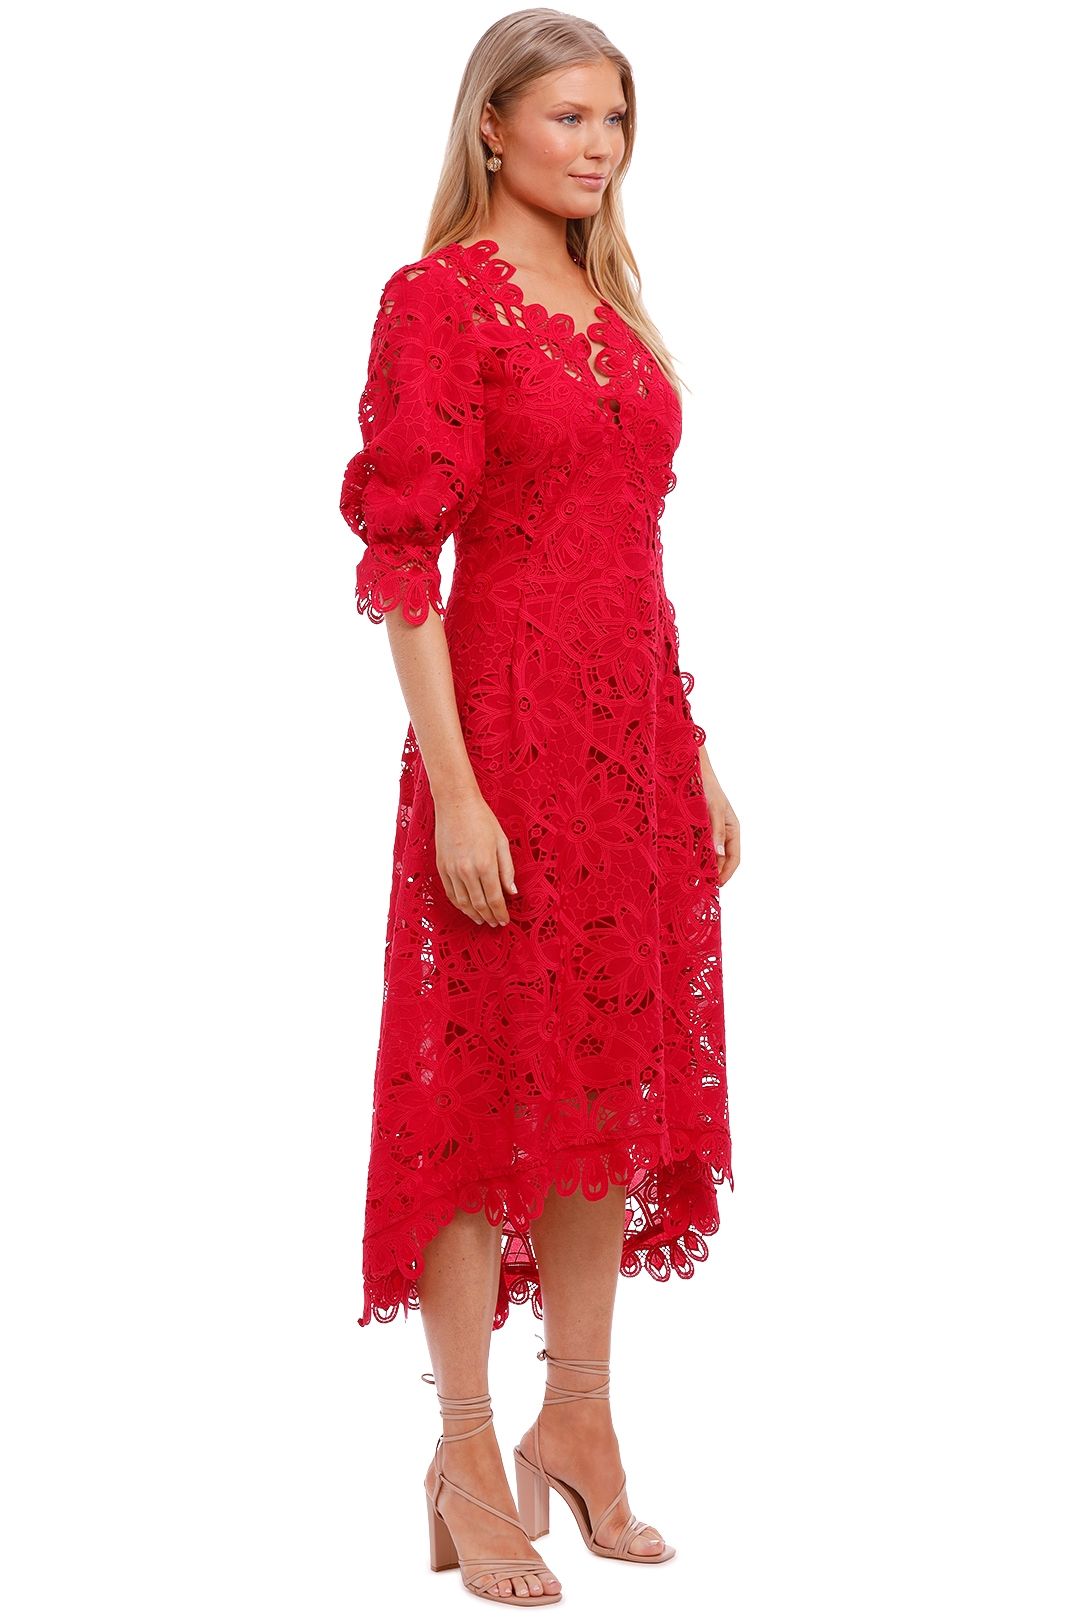 Moss and Spy Macgraw Short Sleeve Dress embroidery